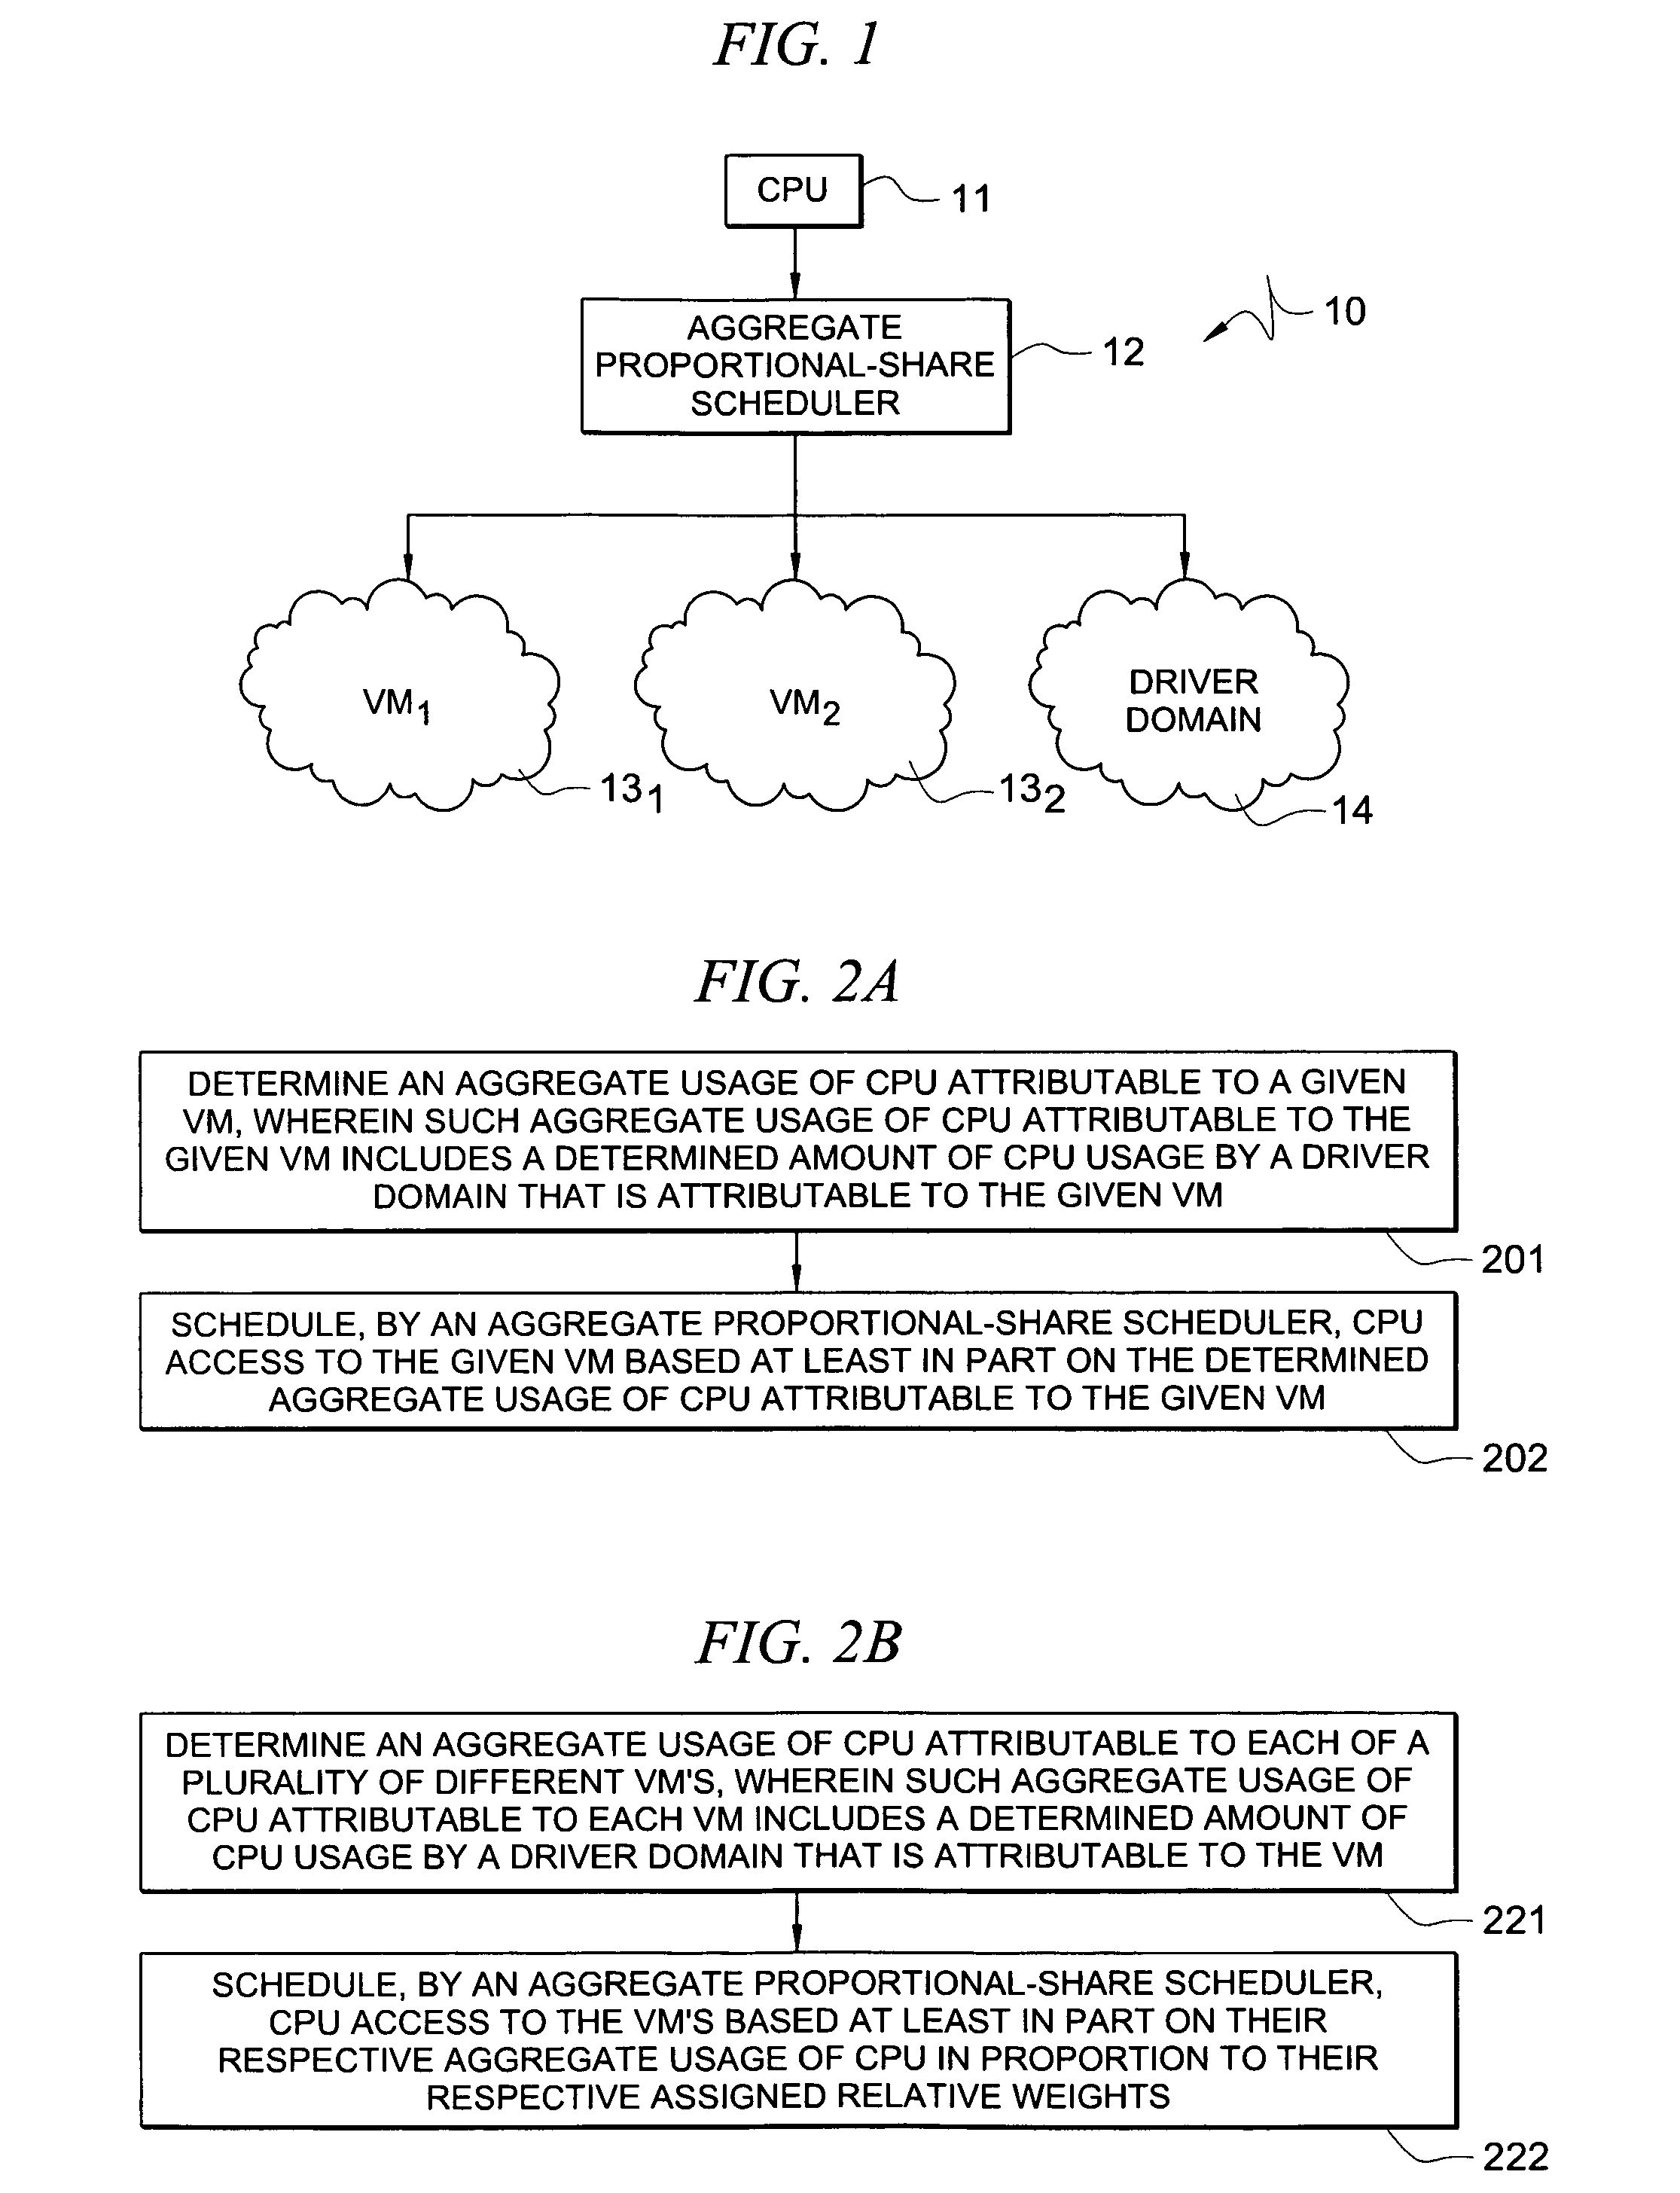 System and method for controlling aggregate CPU usage by virtual machines and driver domains